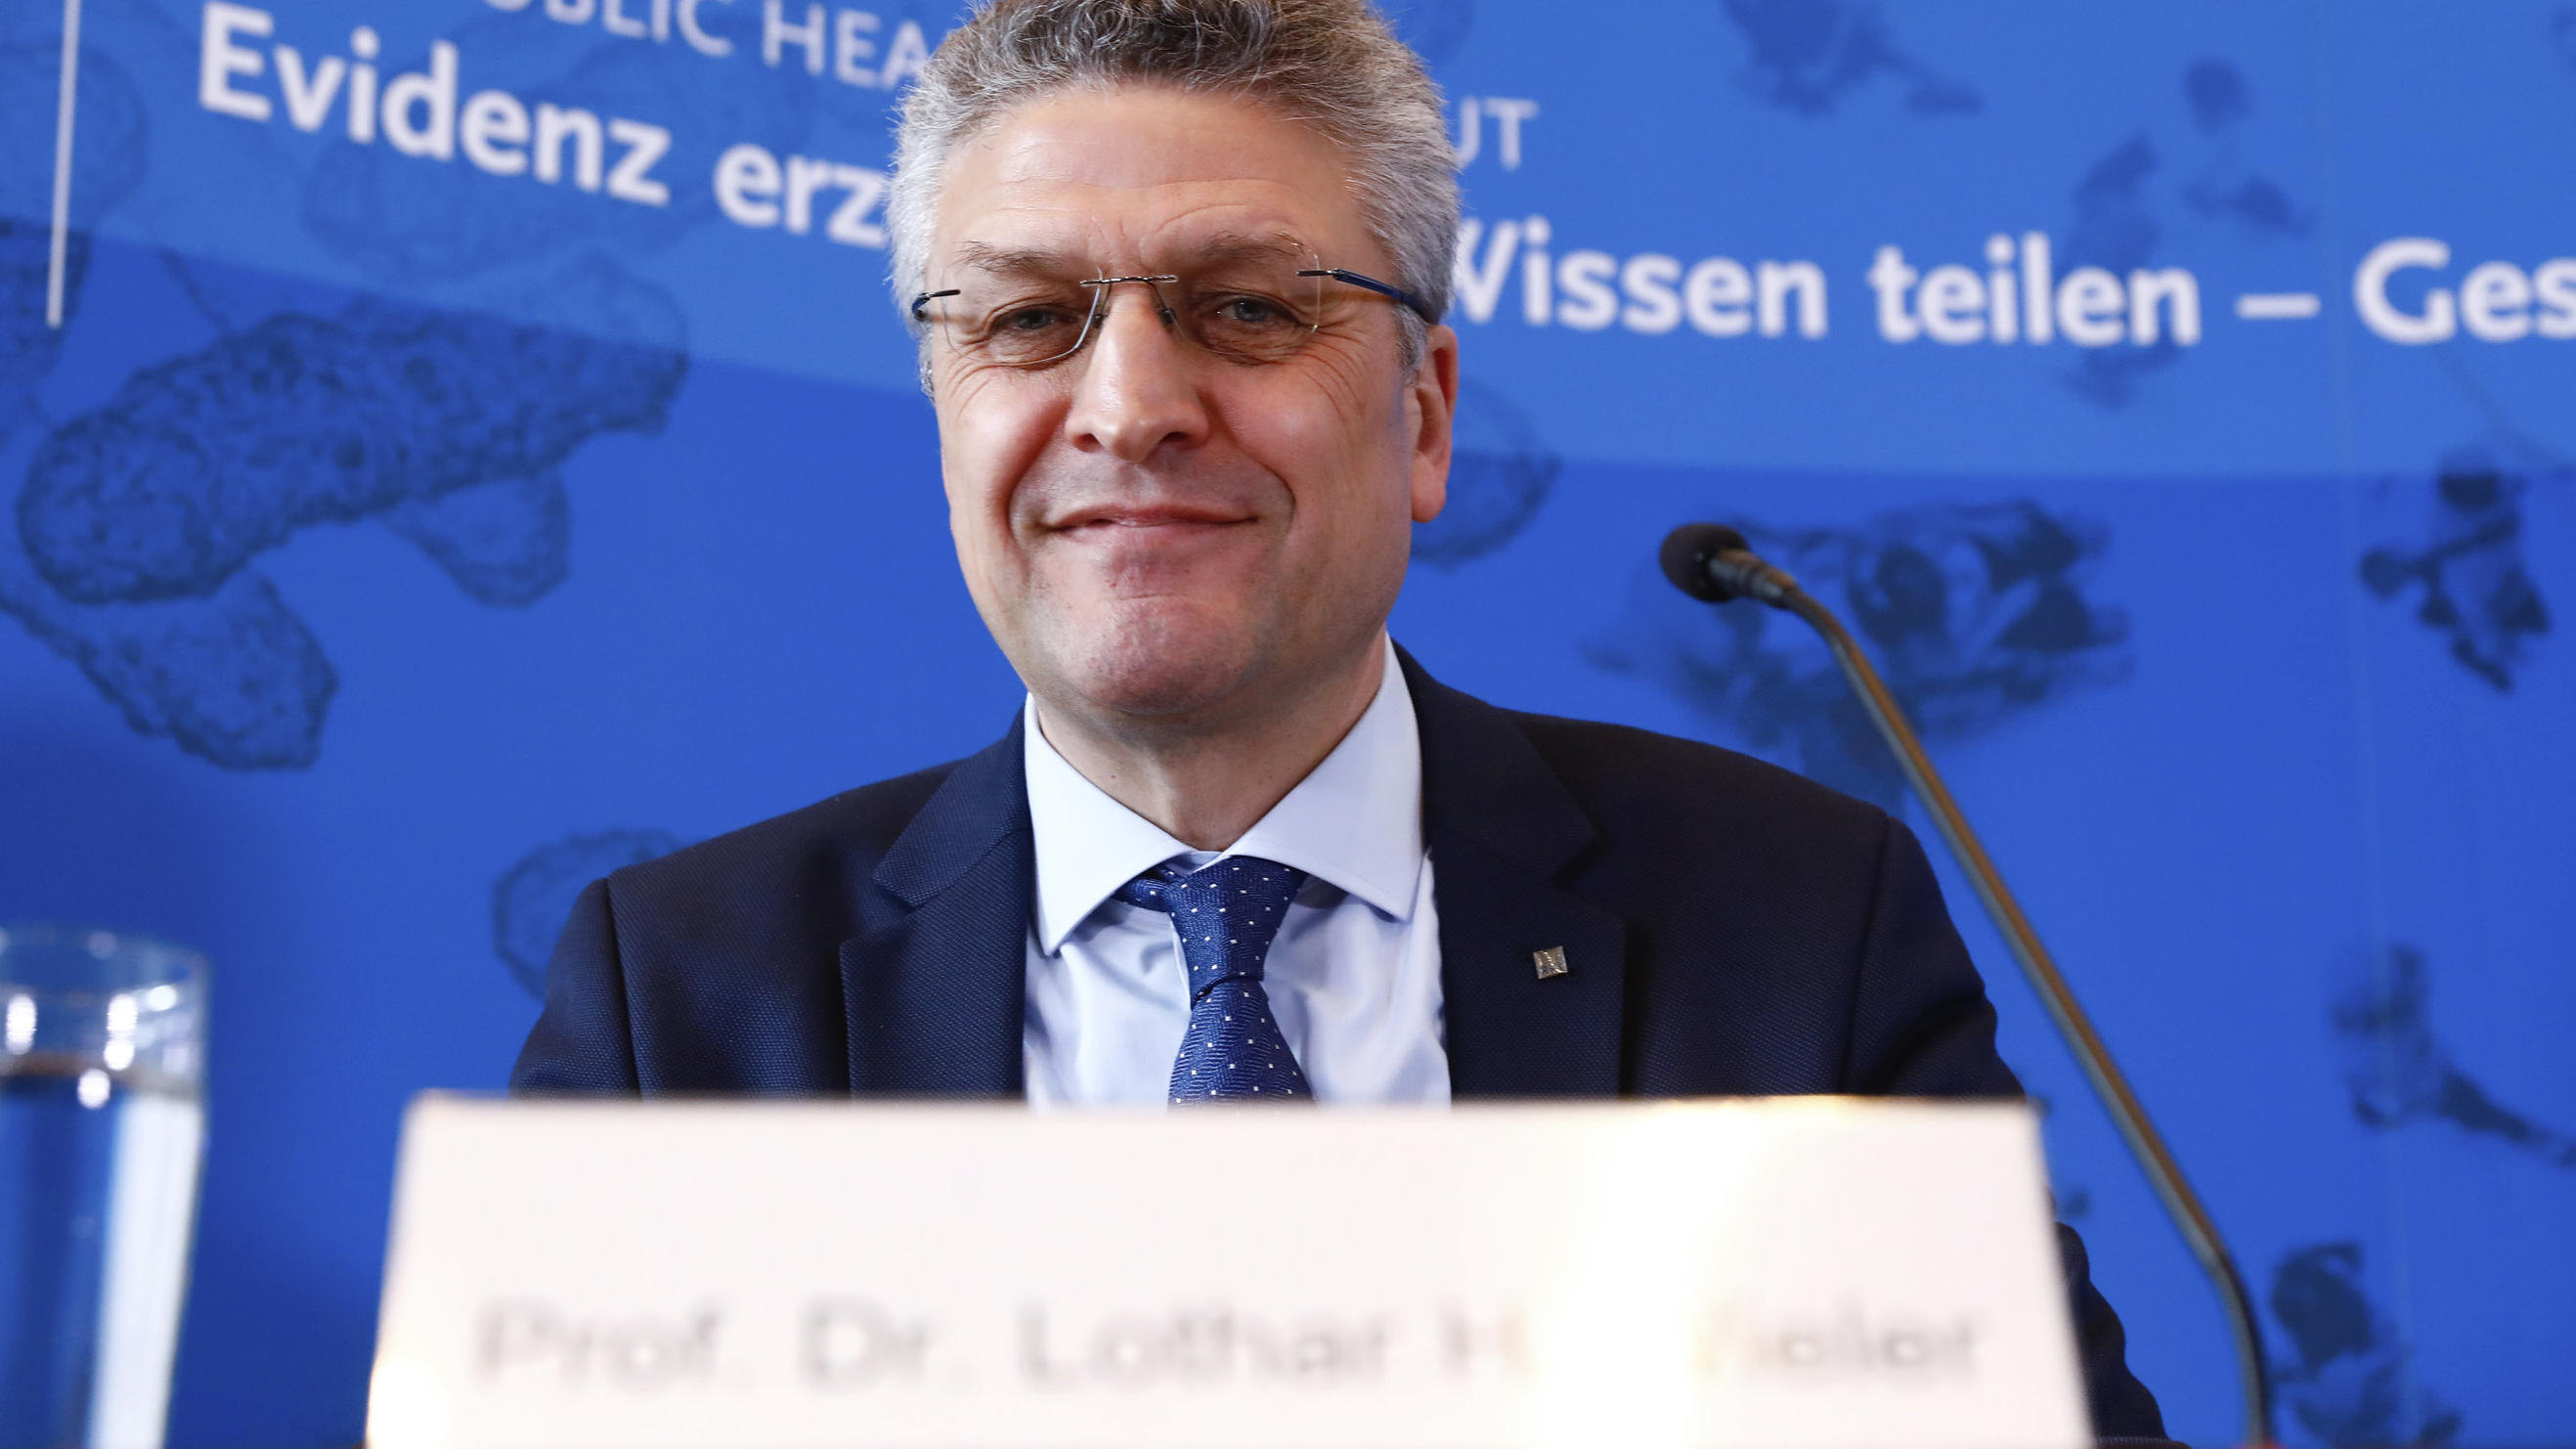 Lothar H. Wieler, President of the Robert Koch Institute (RKI), briefs the media during a news conference of the Robert Koch Institute about the status of the spread of the coronavirus in Berlin, Germany, April 3, 2020. (Michele Tantussi/Pool via AP)